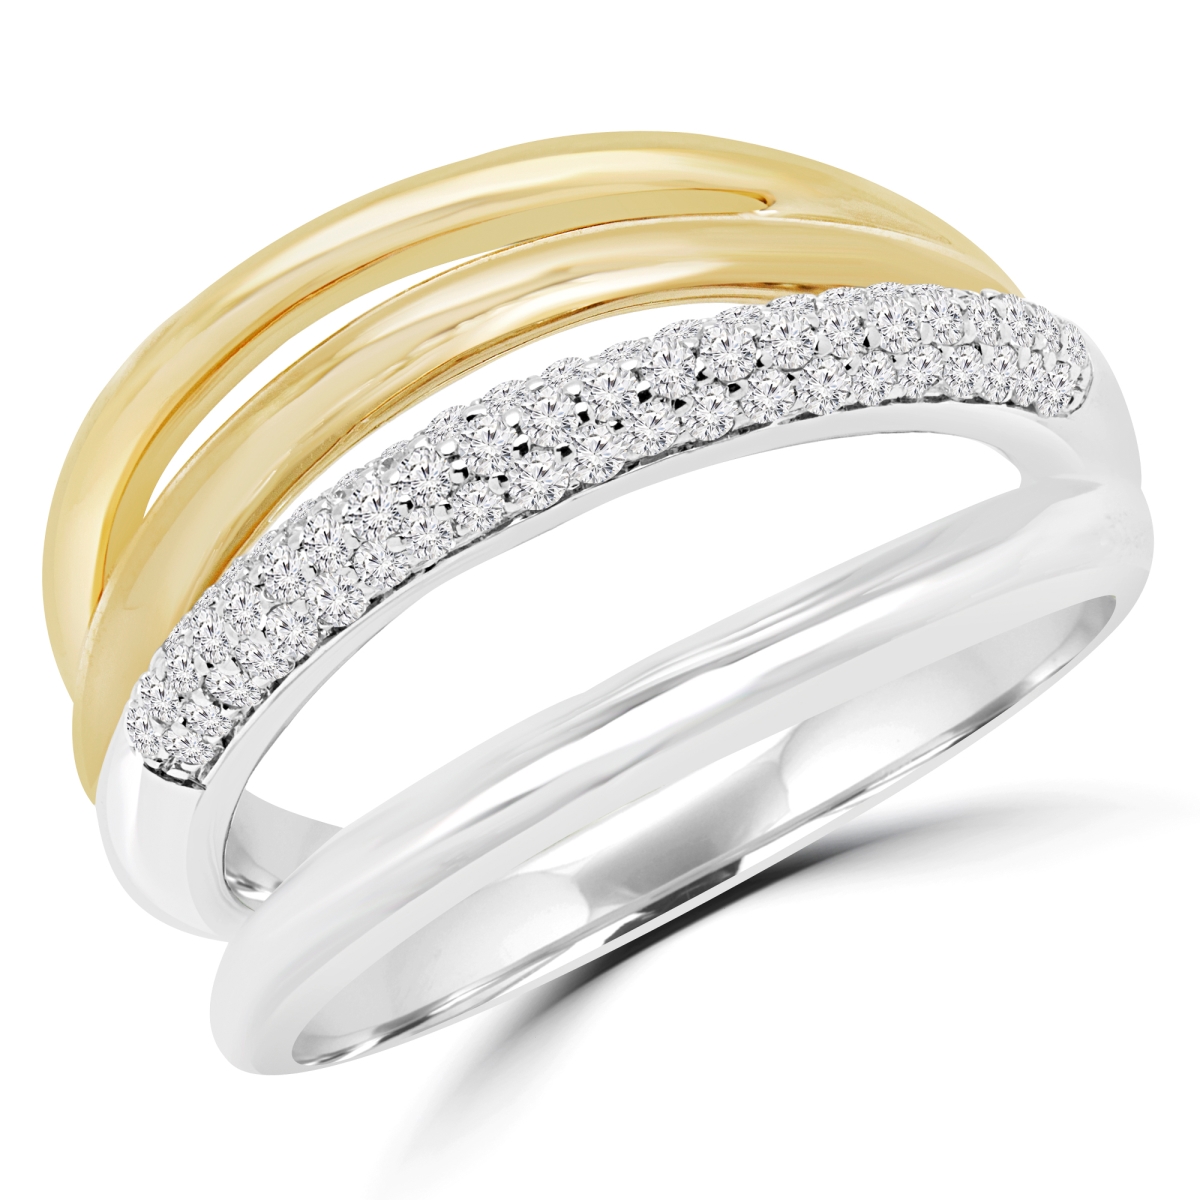 Picture of Majesty Diamonds MDR170050-5.75 0.37 CTW Round Diamond Cocktail Semi-Eternity Ring in 14K Two-Tone Gold - 5.75